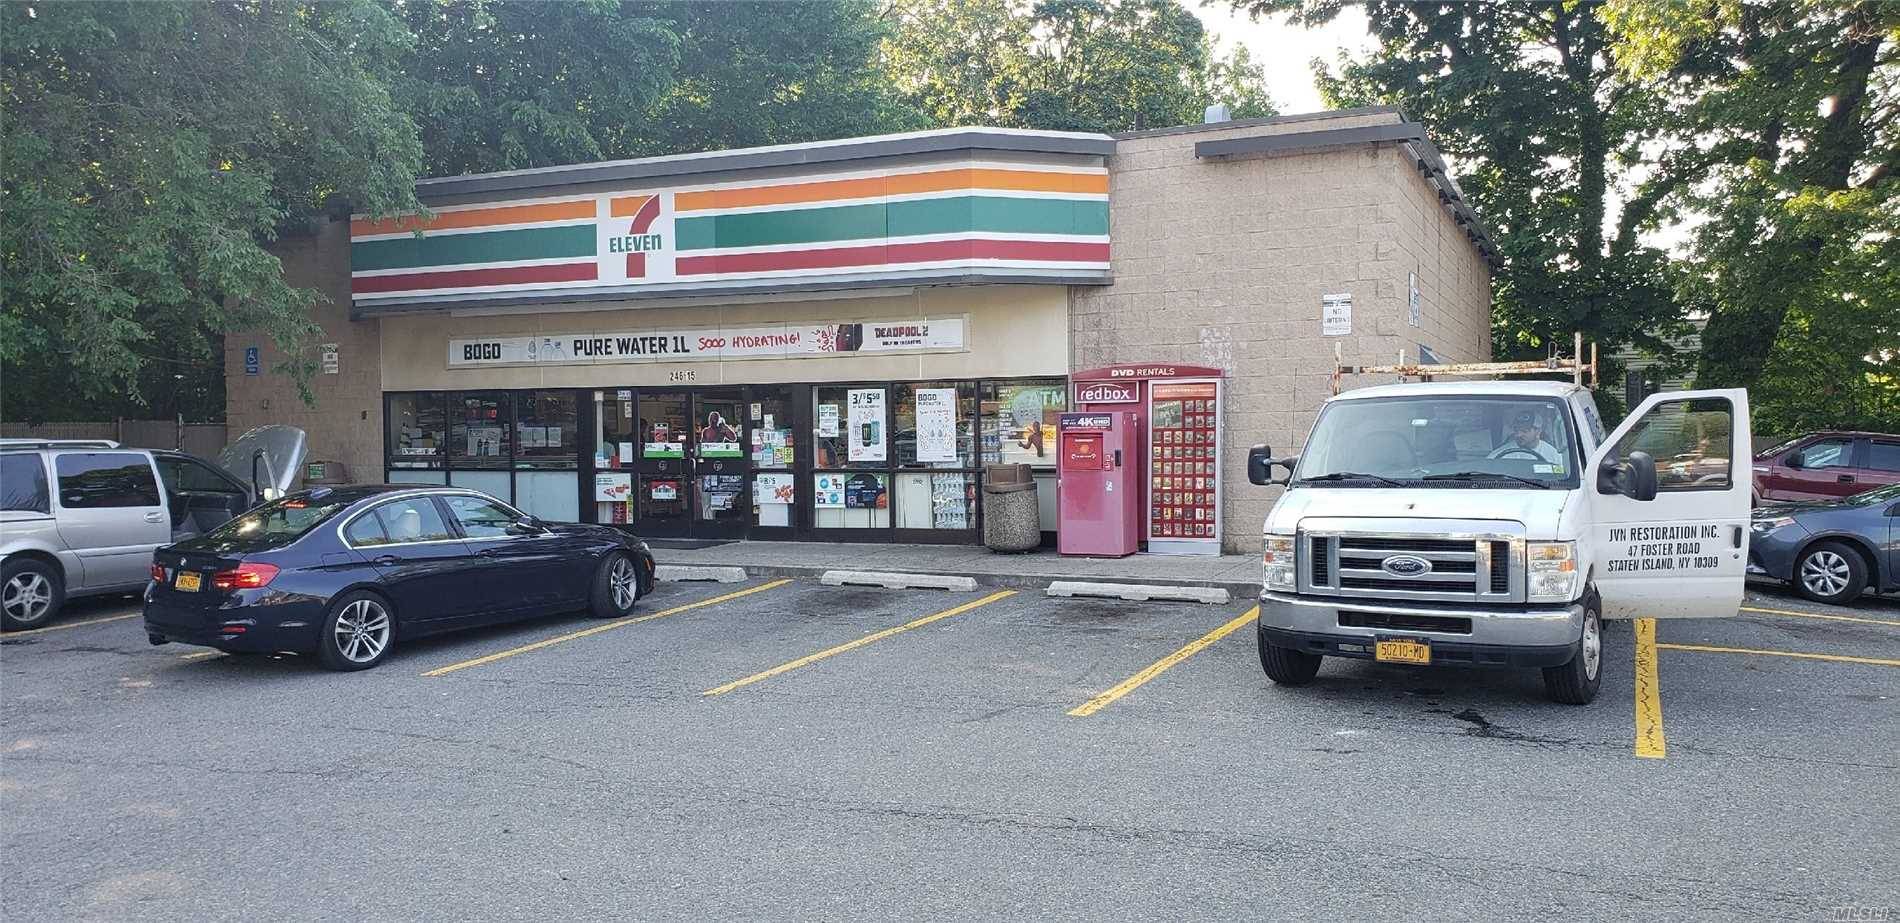 Primary Location On Northern Blvd, Franchise 7-11 Business For Sale!!